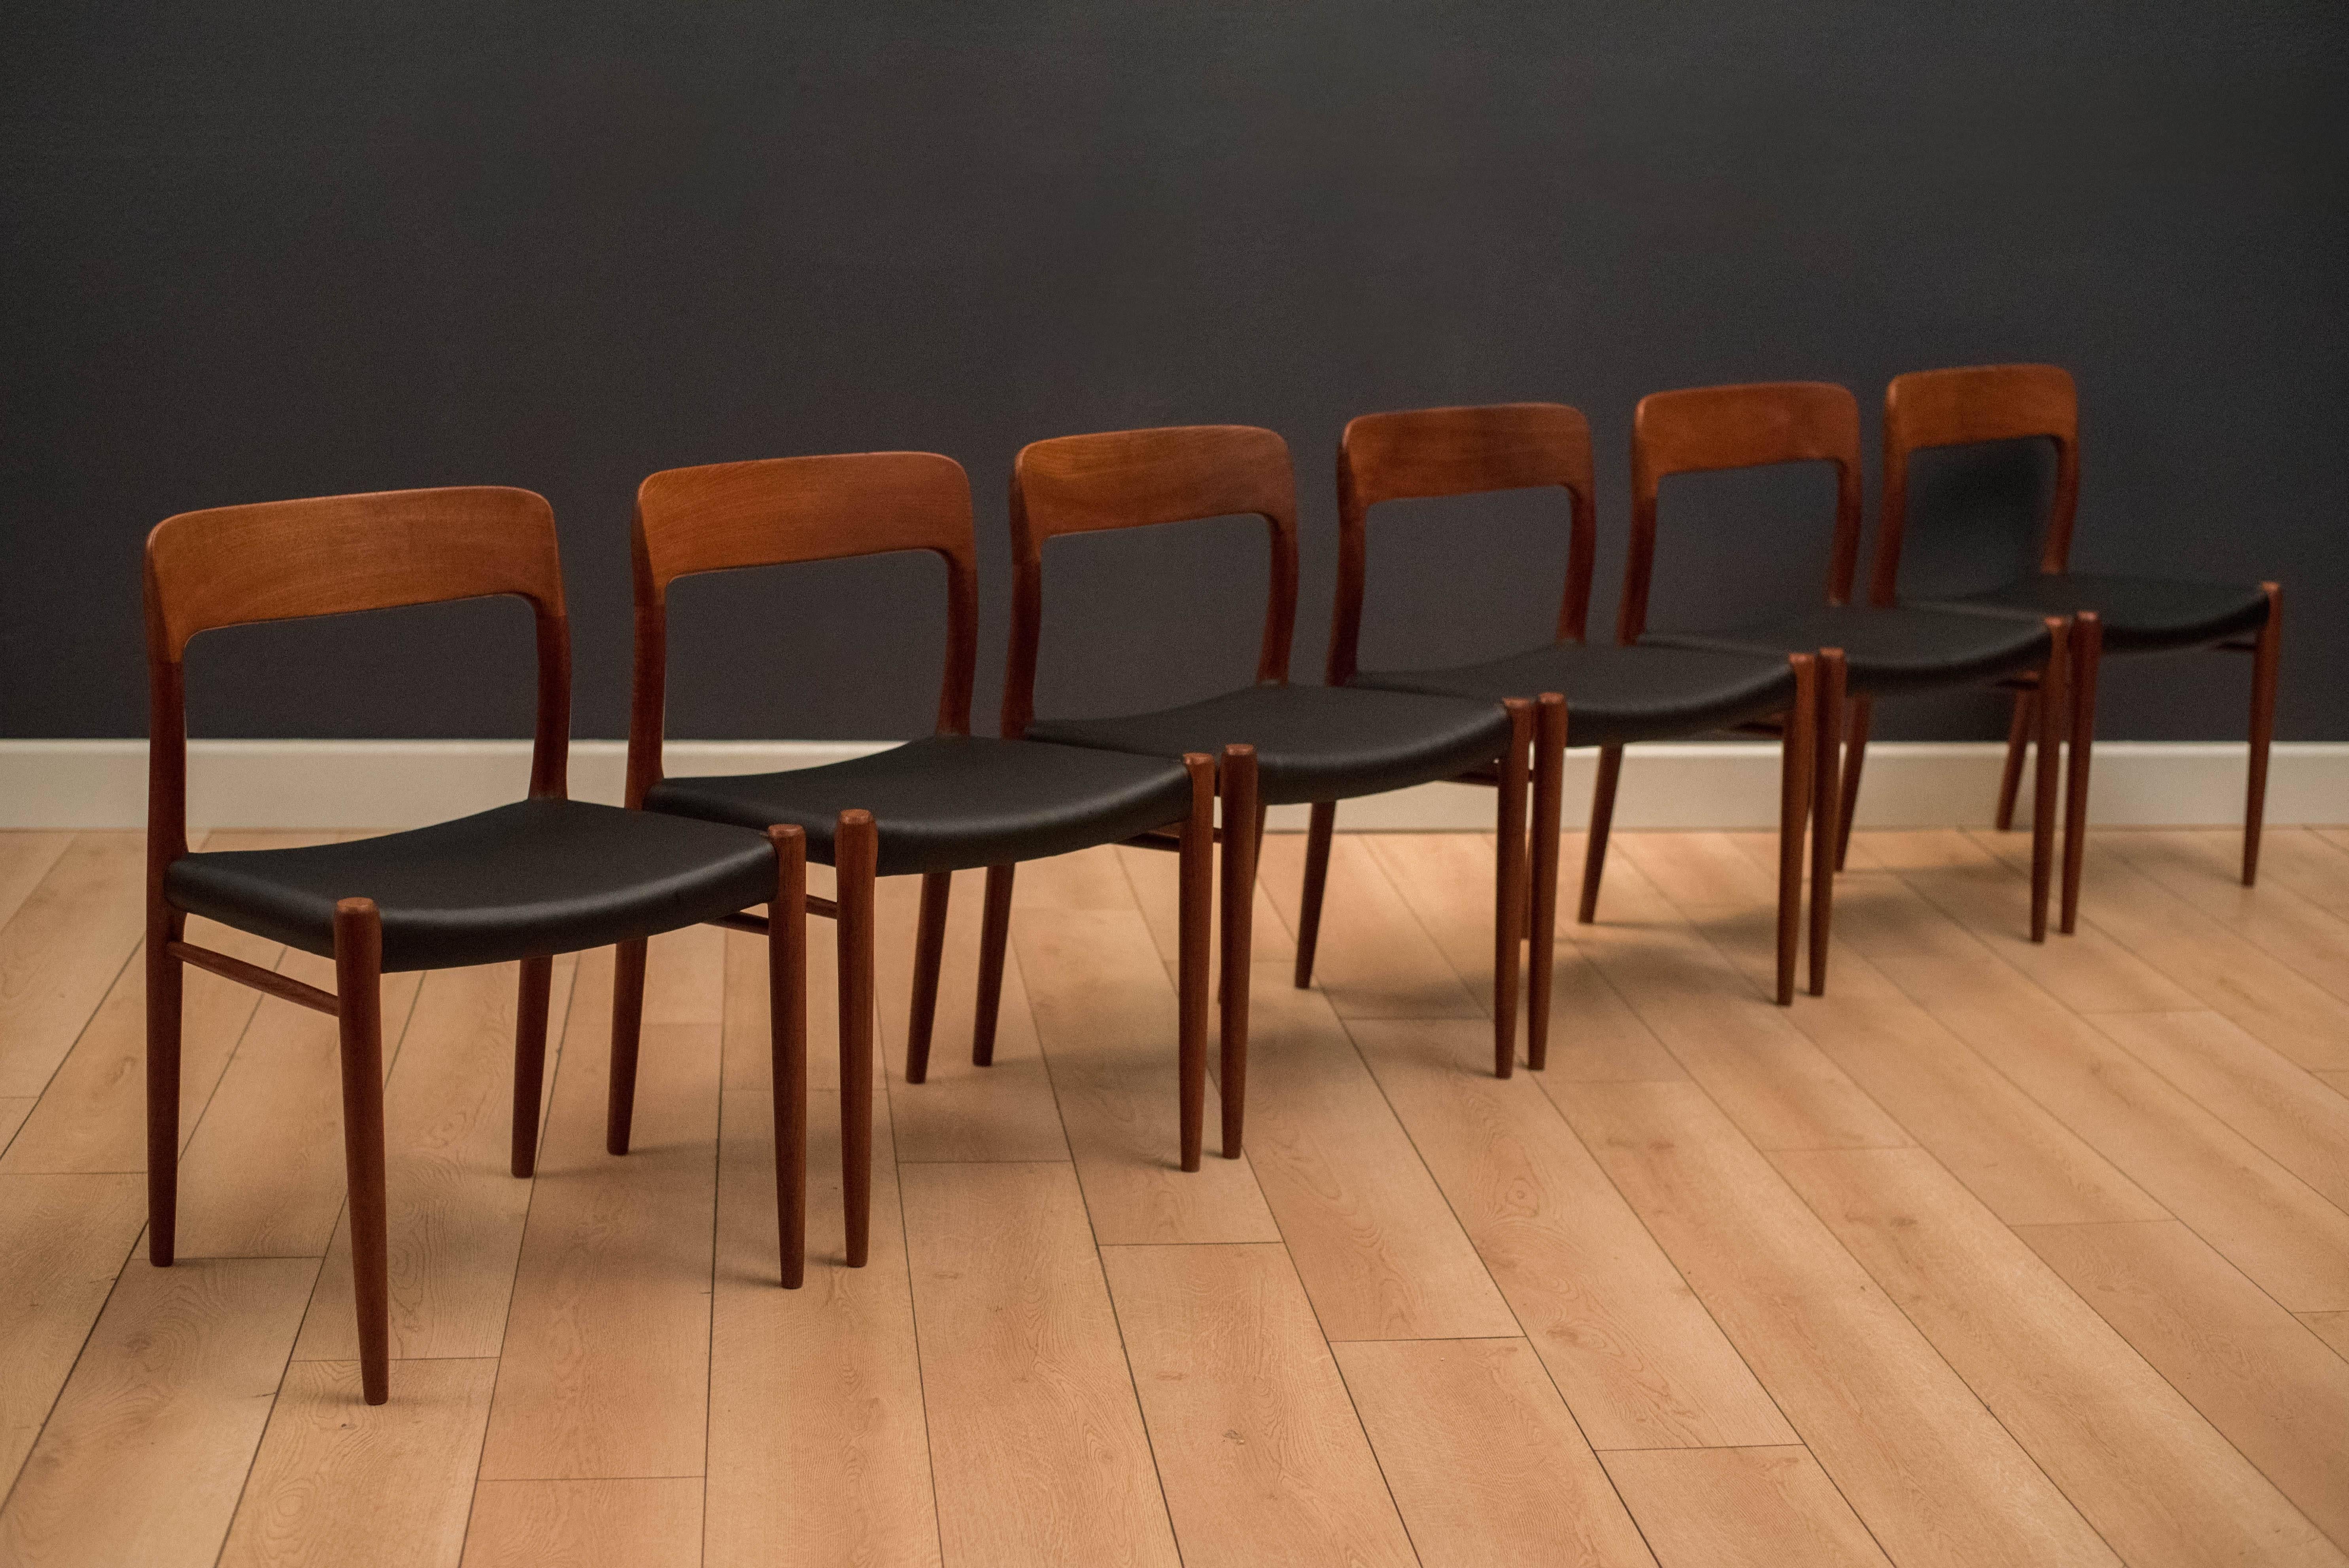 Mid century Niels Moller dining chairs in teak, circa 1960s. This set includes six model no. 75 chairs. Seats have been professionally reupholstered in black leatherette.
 